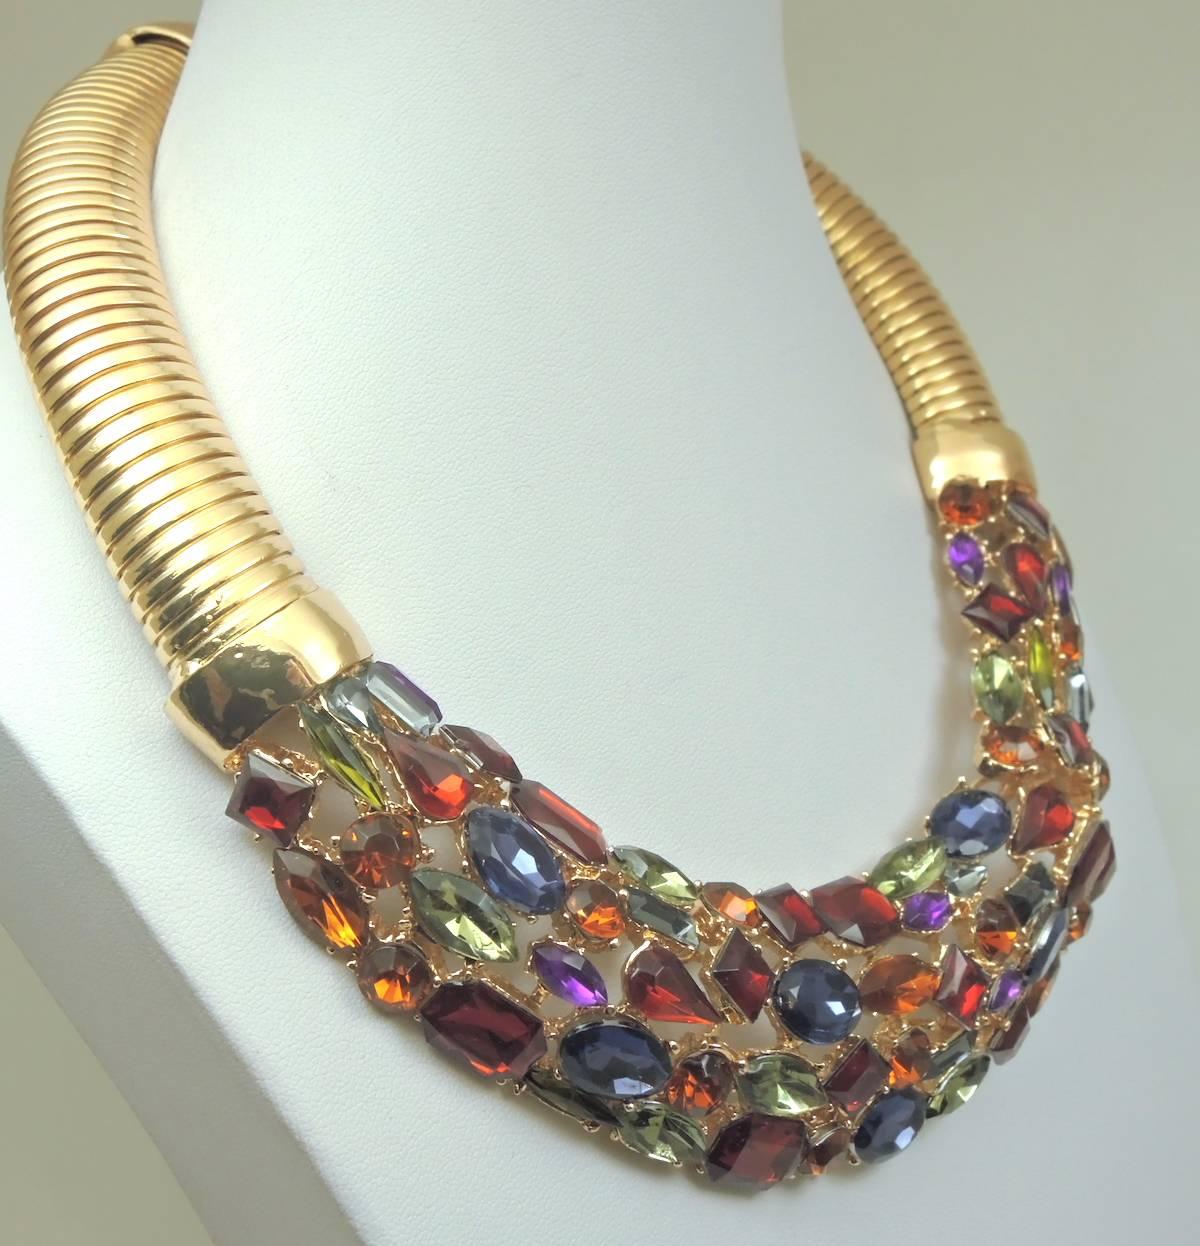 This wonderful wide collar necklace was designed with prong set multi sized and colorful glass stones. It was made with a flexible ribbed chain and measures 19” x 1-1/2” at the widest part. It has a lobster clasp and is in a glossy gold tone